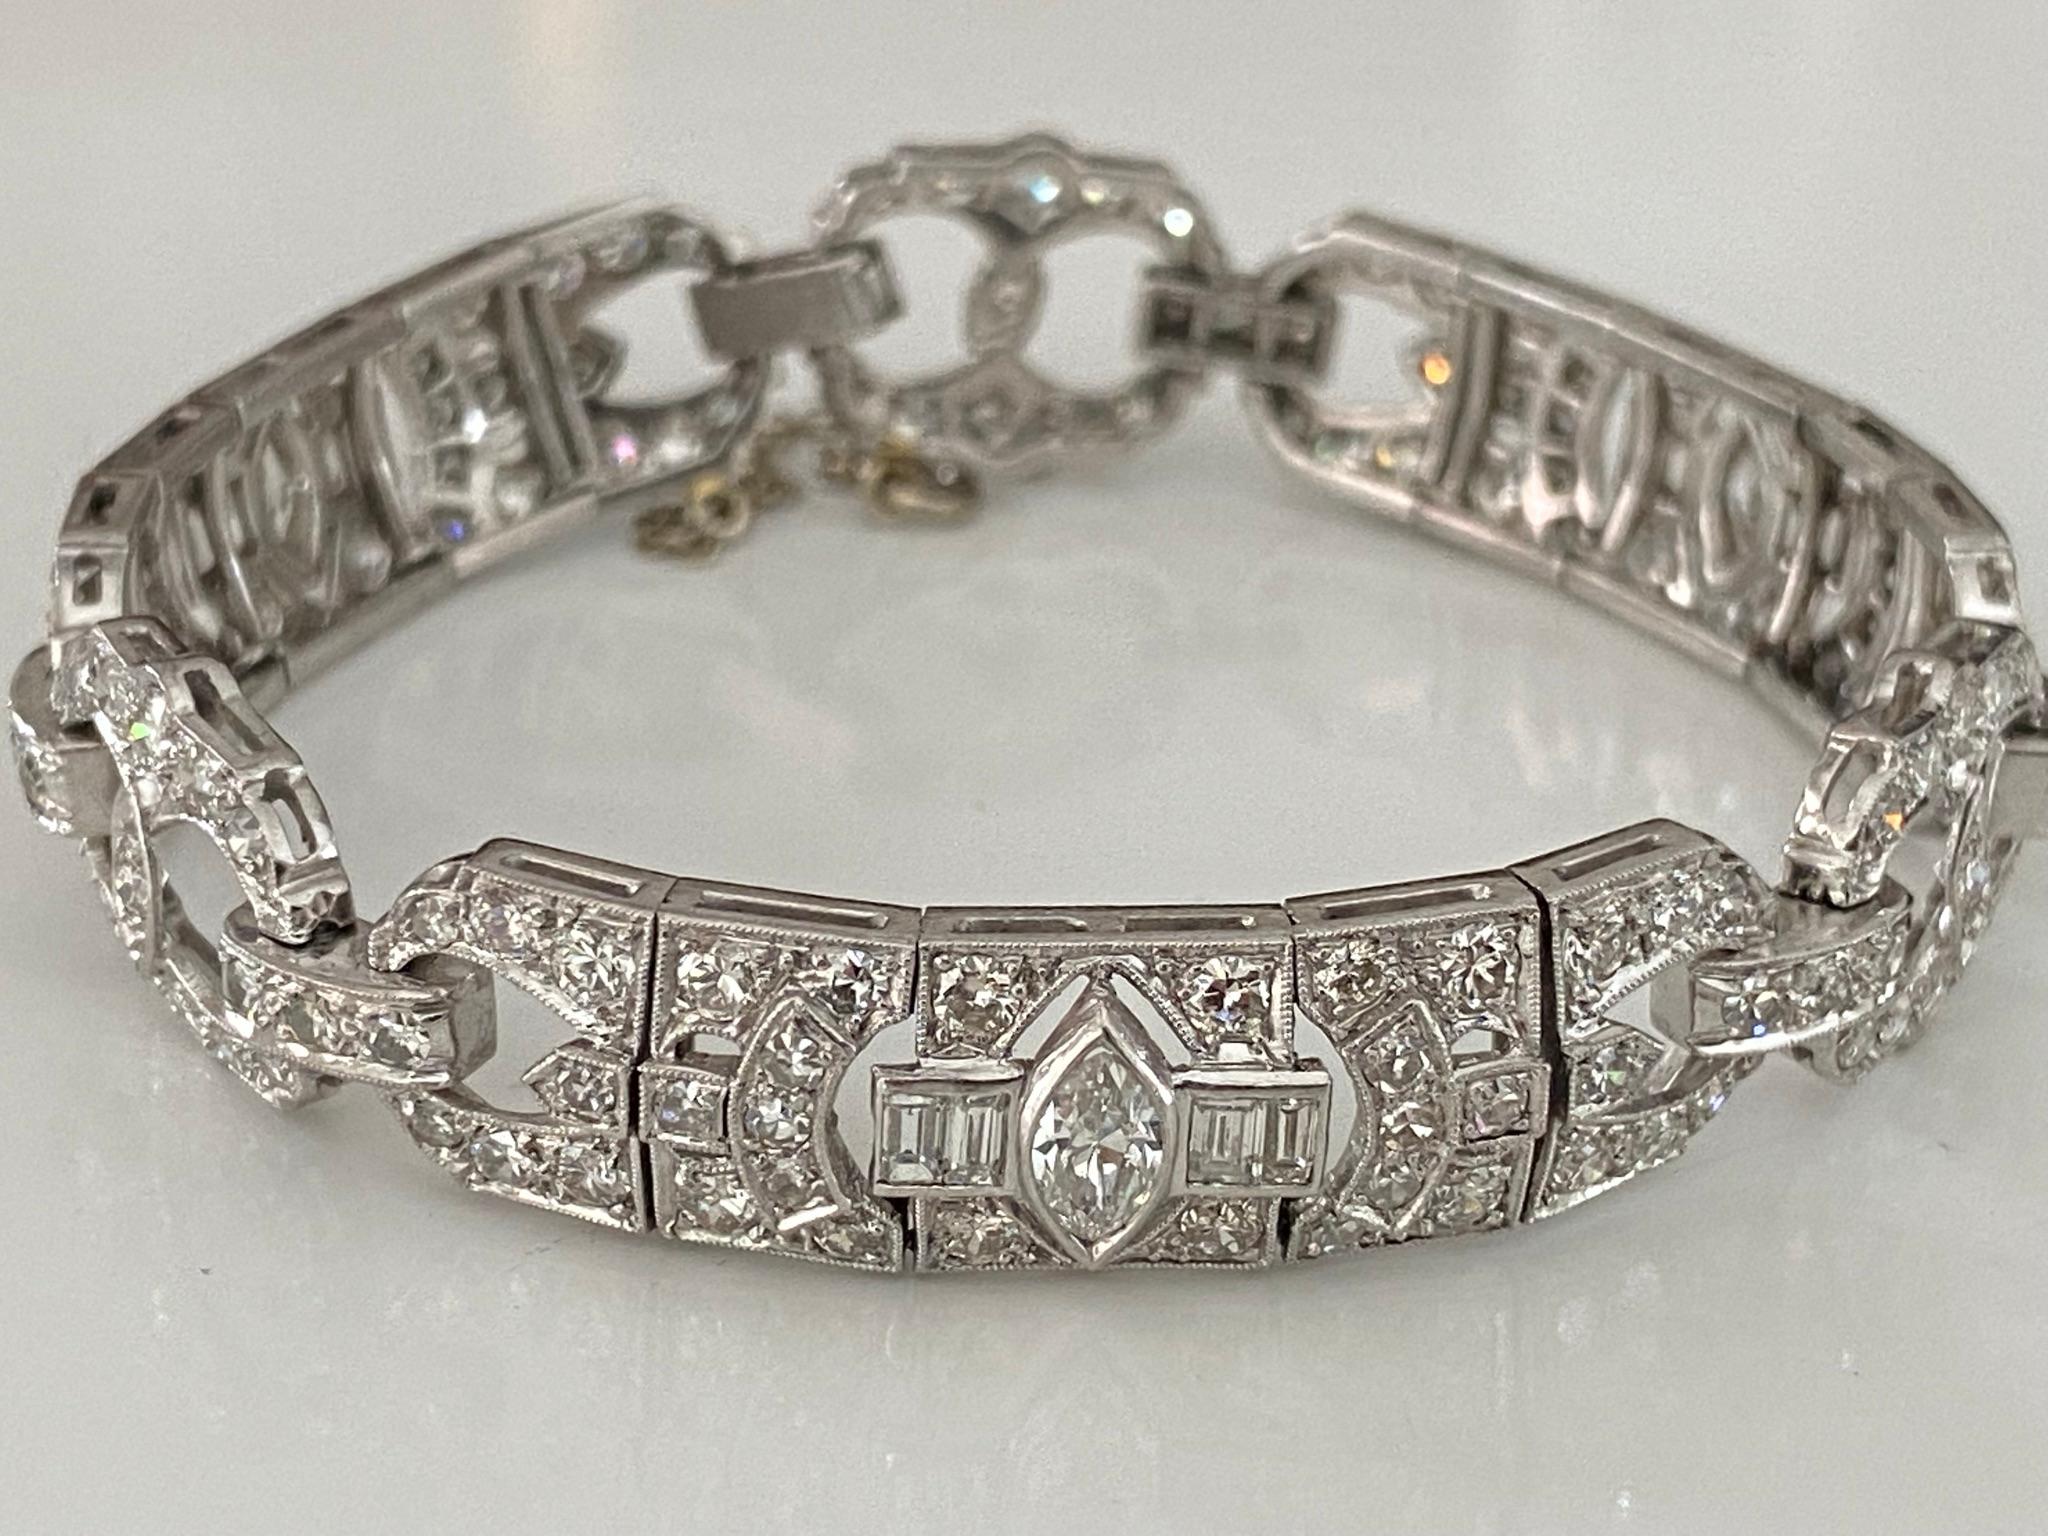 This dazzling Art Deco link bracelet fashioned in platinum showcases a glistening array of Old European cut, single cut, marquise and baguette diamonds totaling approximately 9.00 carats, G-H color, VS-SI clarity. Circa 1930s, with a 14kt white gold